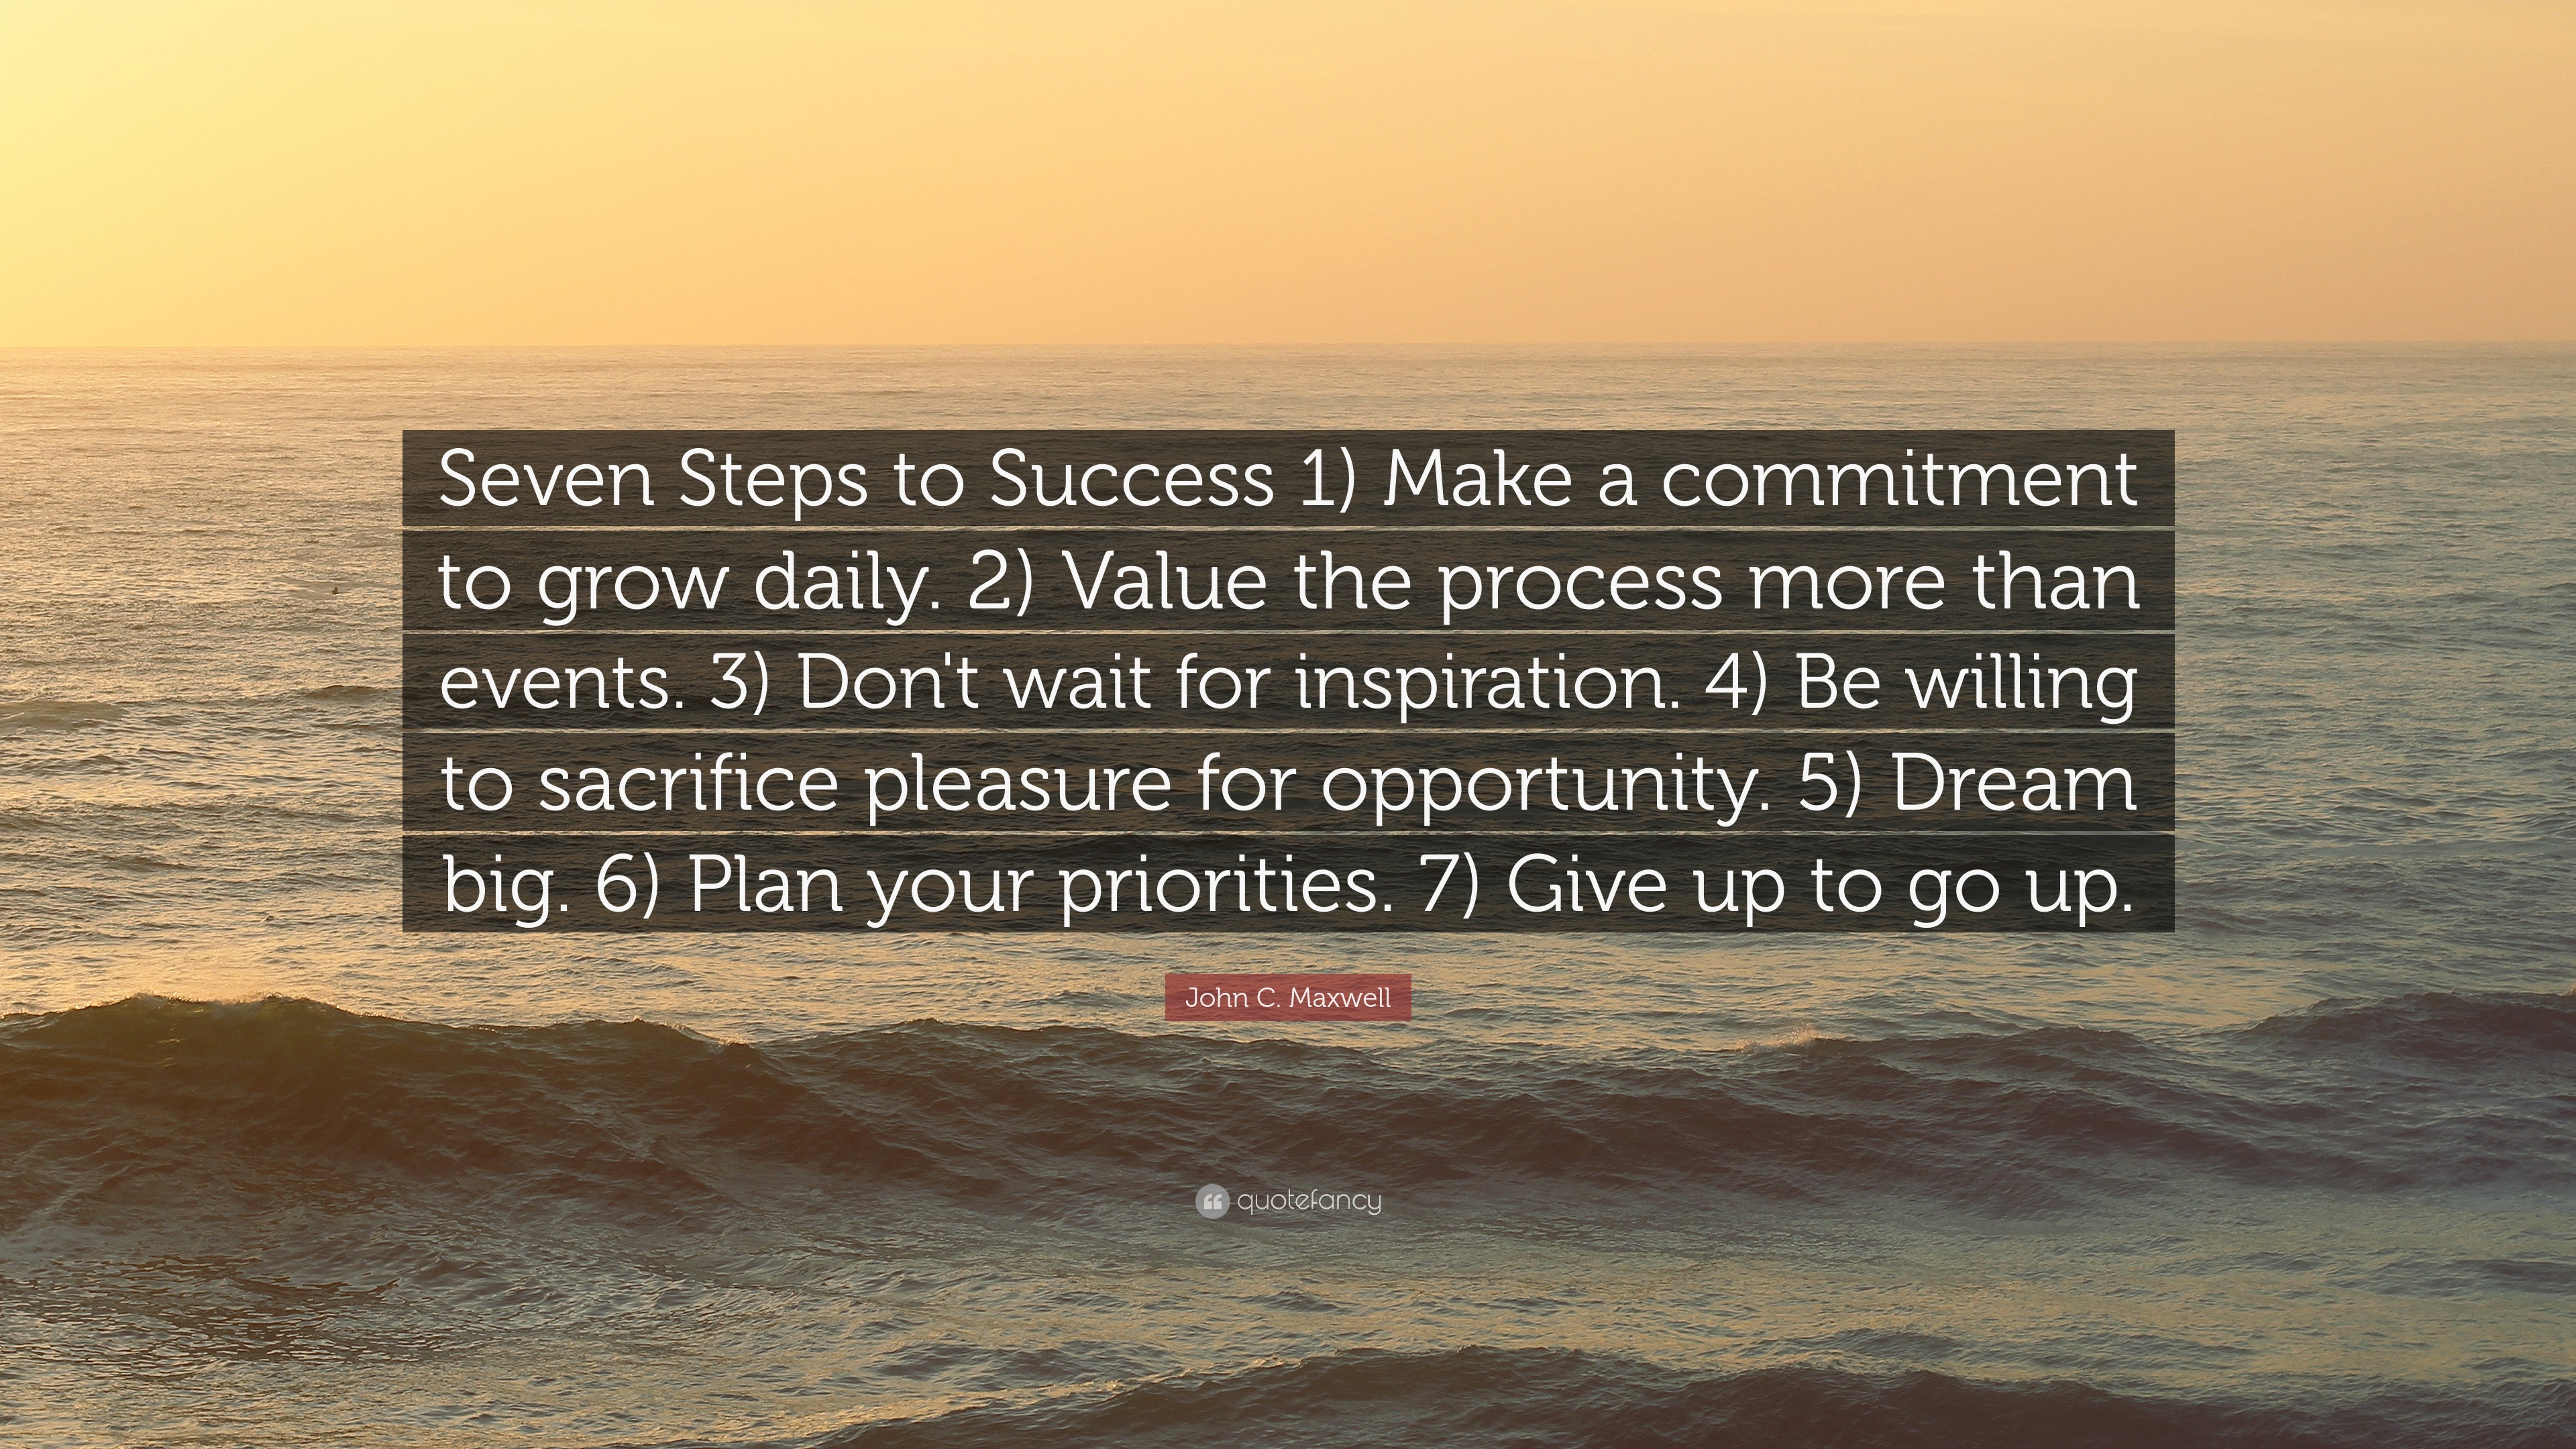 John C. Maxwell Quote: “Seven Steps to Success 1) Make a commitment to